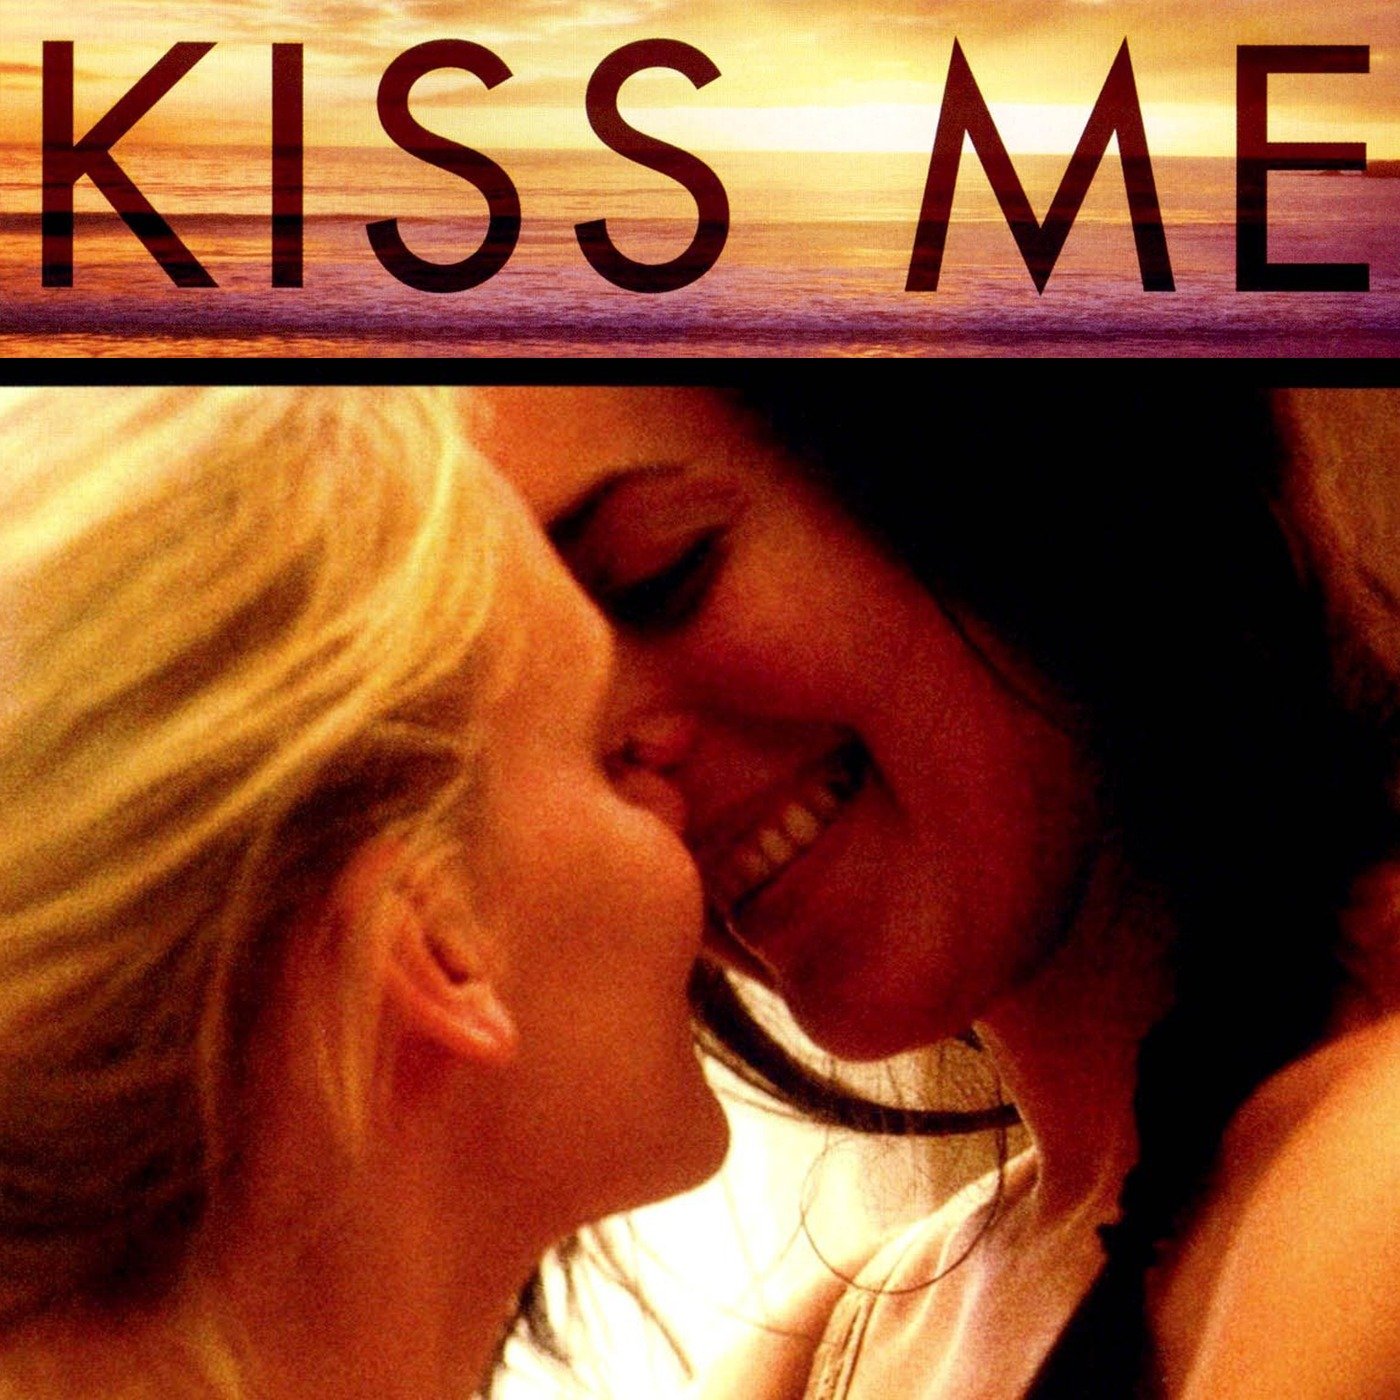 carol laflamme recommends Kiss Me 2014 Full Movie